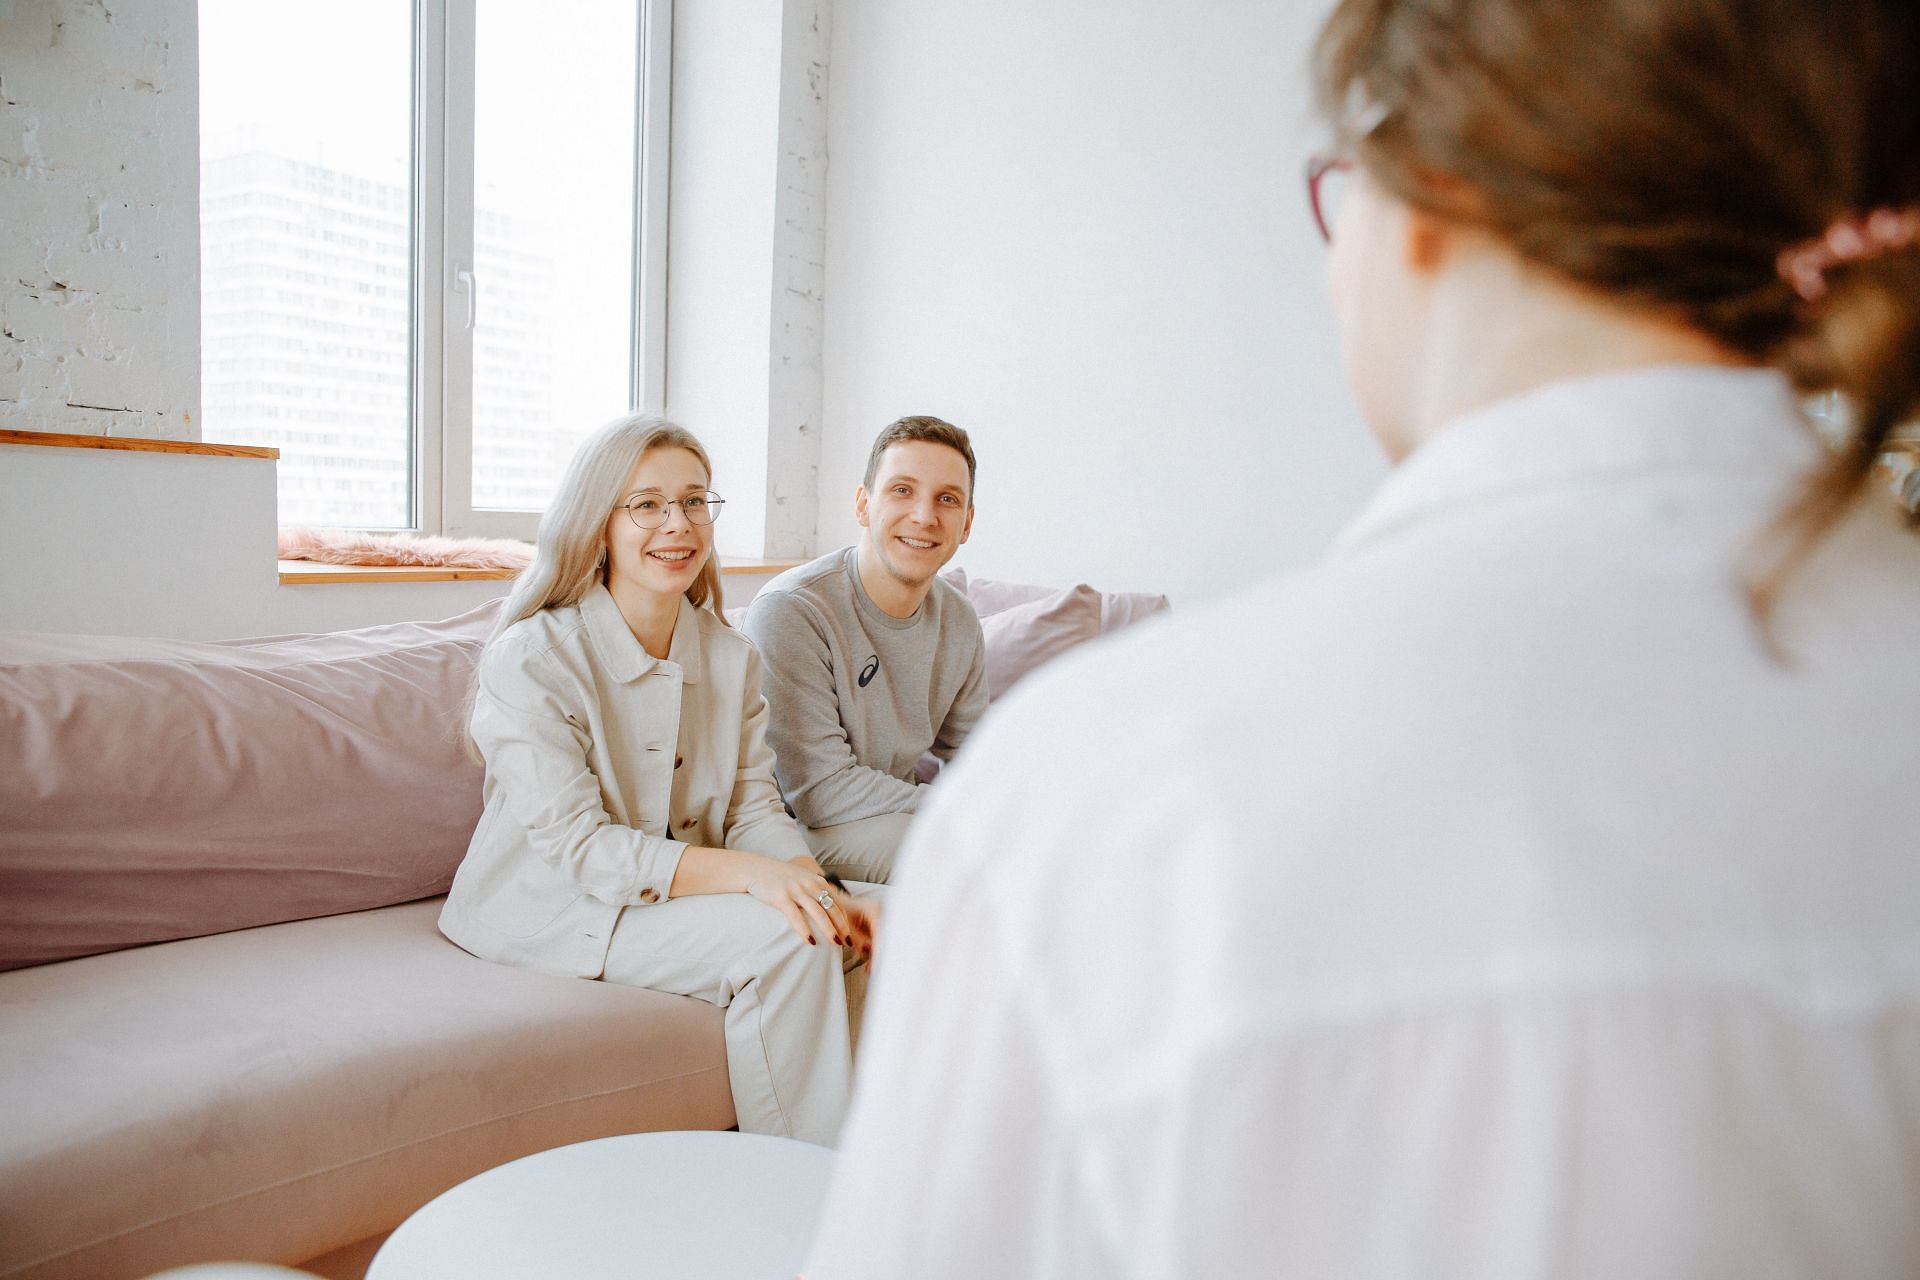 There are many couple therapy techniques to try in 2023. (Image via Pexels/ Polina Zimmerman)